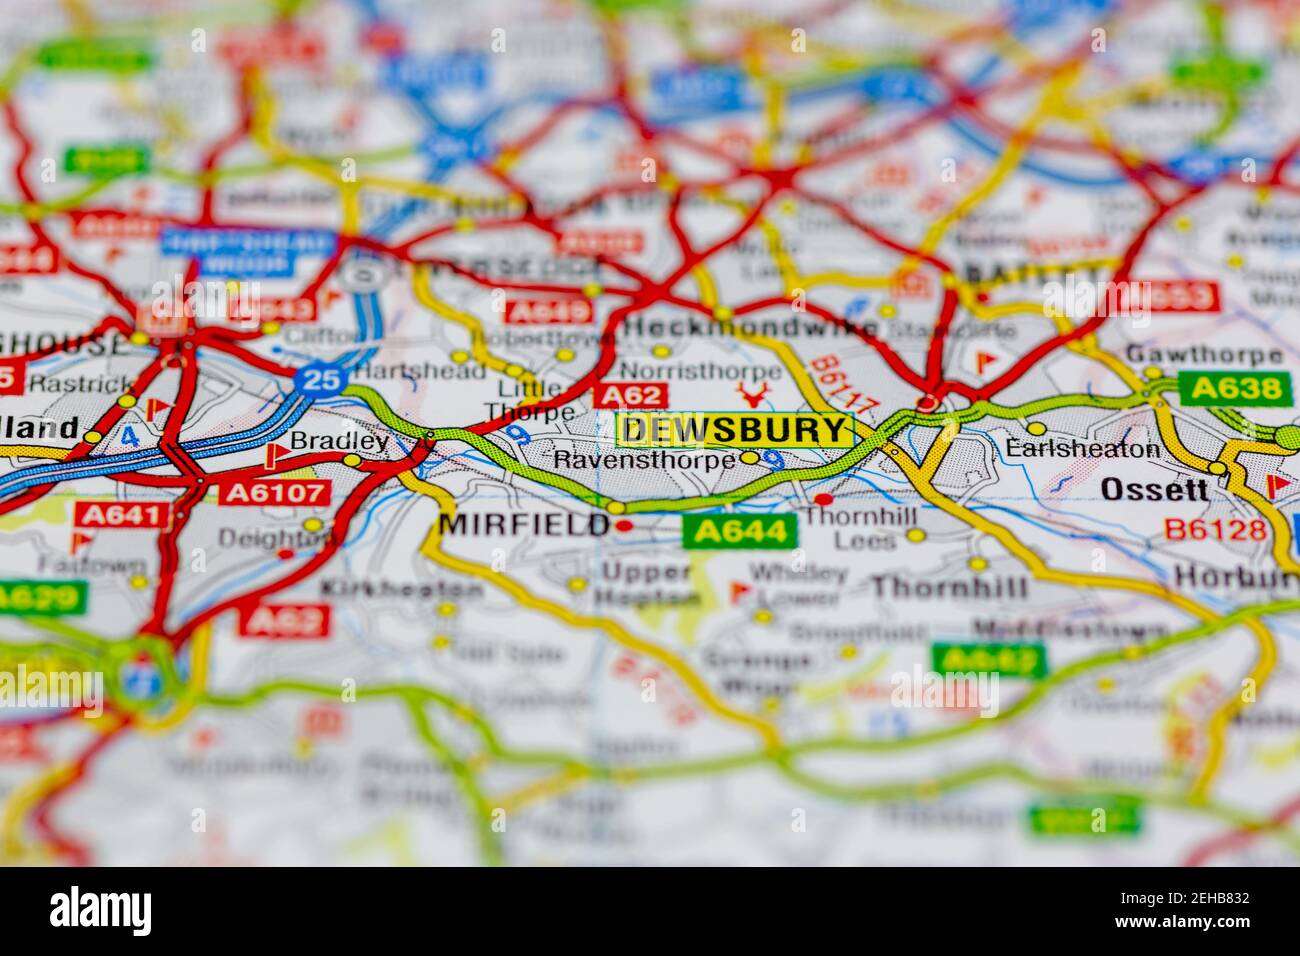 Dewsbury and surrounding areas shown on a road map or Geography map Stock Photo